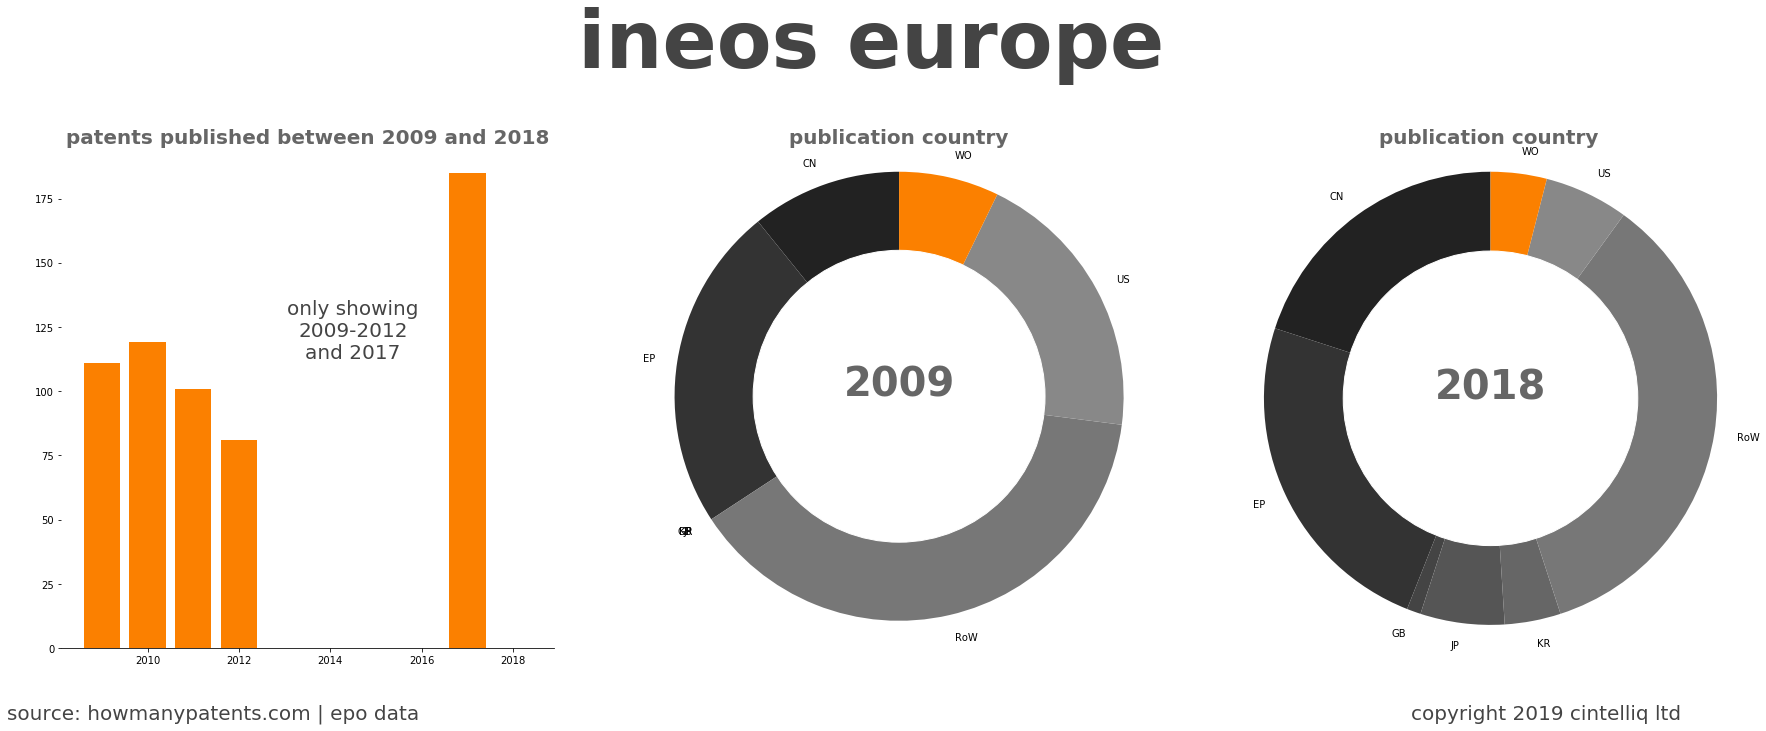 summary of patents for Ineos Europe